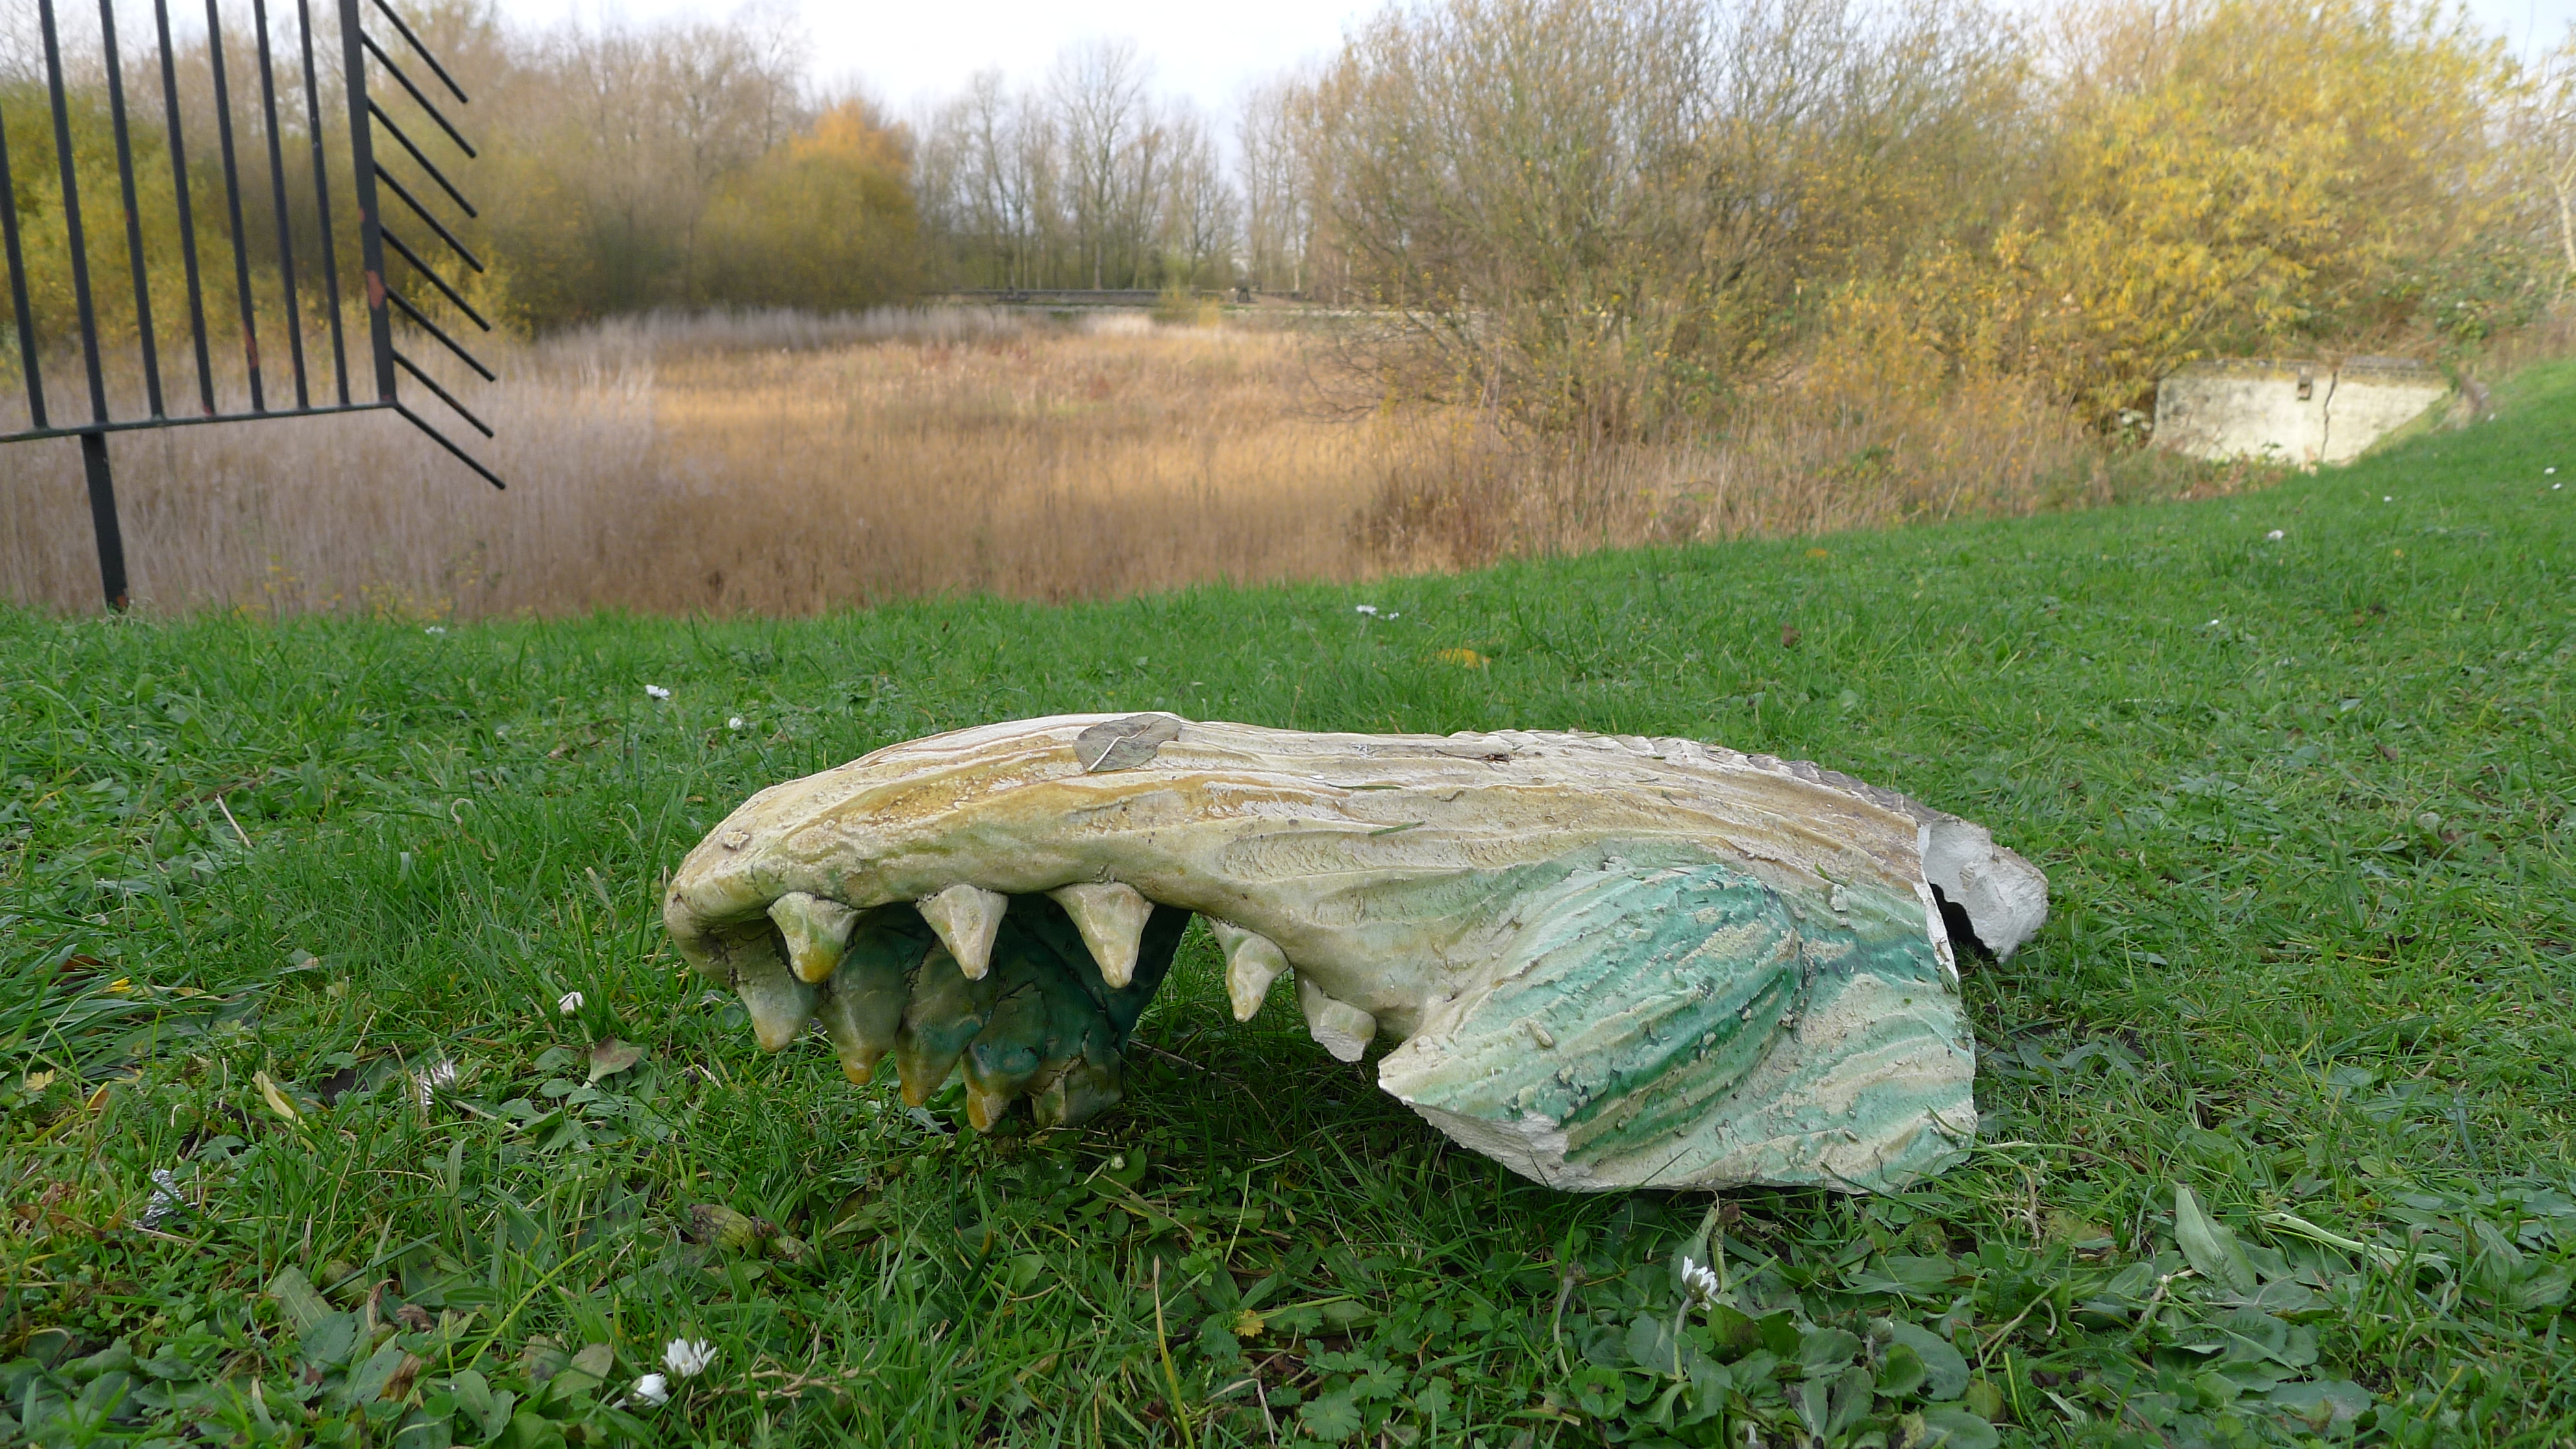 The Death of a Fish in Hackney’s Abandoned Filter Beds